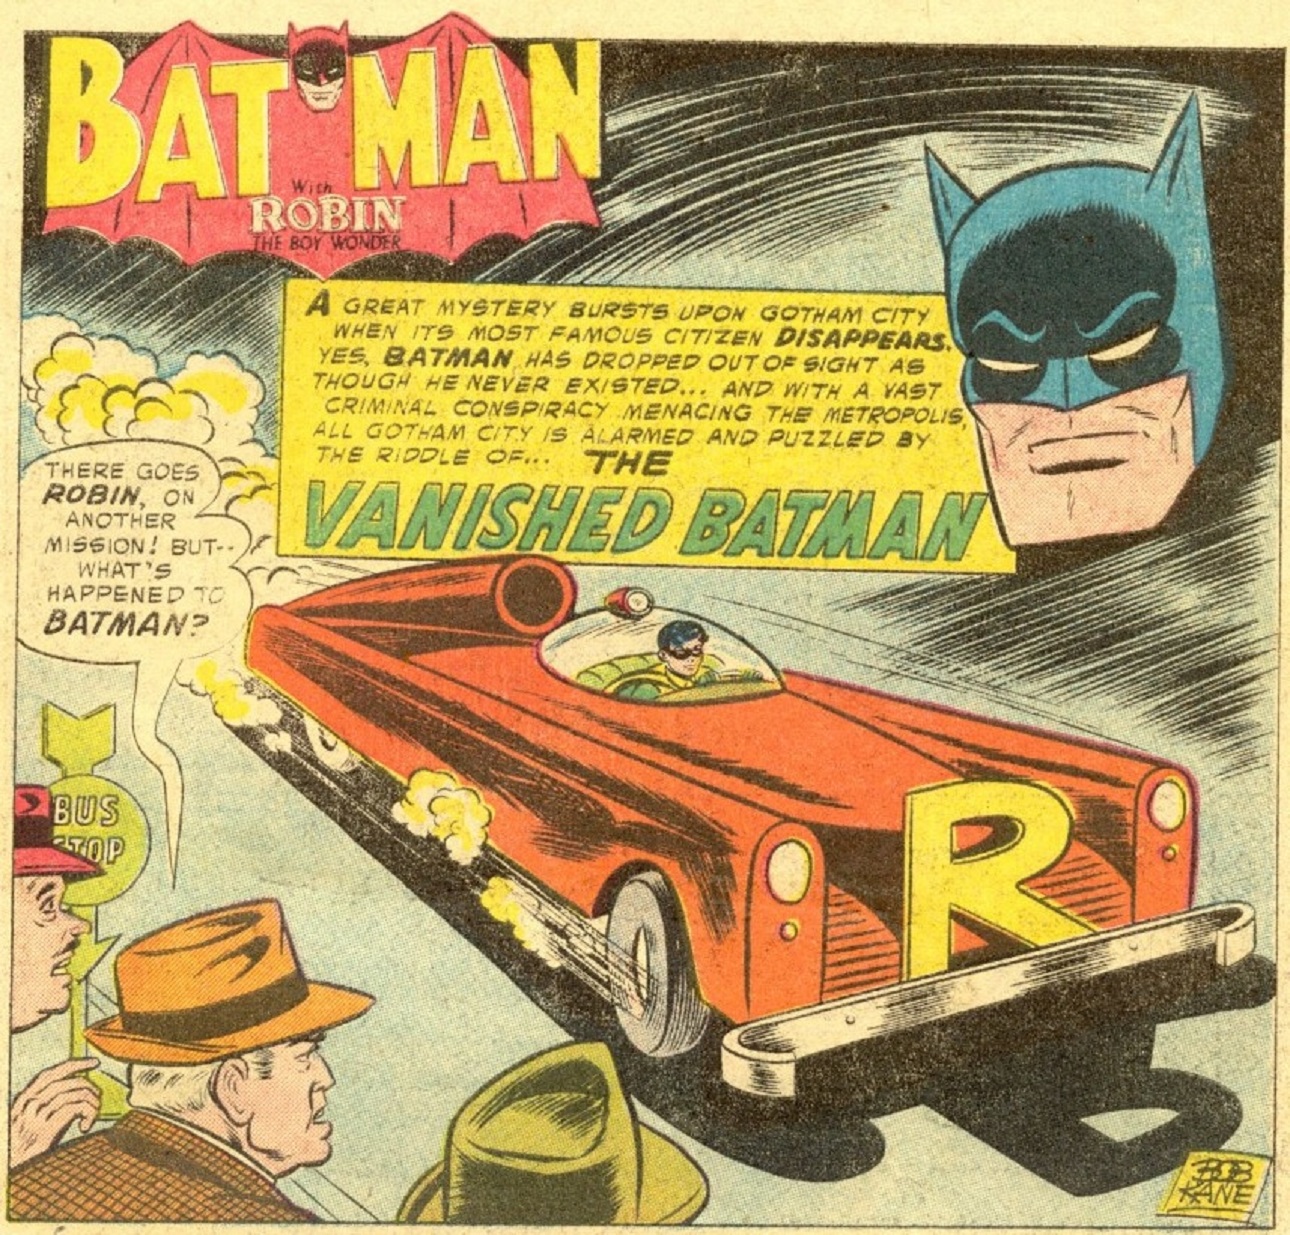 dc robin vehicles - Batman Robin Of Won A Great Mystery Bursts Upon Gotham City When To Most Famous Citizen Disappears. Yes, Batman Was Dropped Out Of Sight As Though He Never ExTed... And With A VA97 Criminal Conspracy Menaging The Metropolis All Gotm Ct